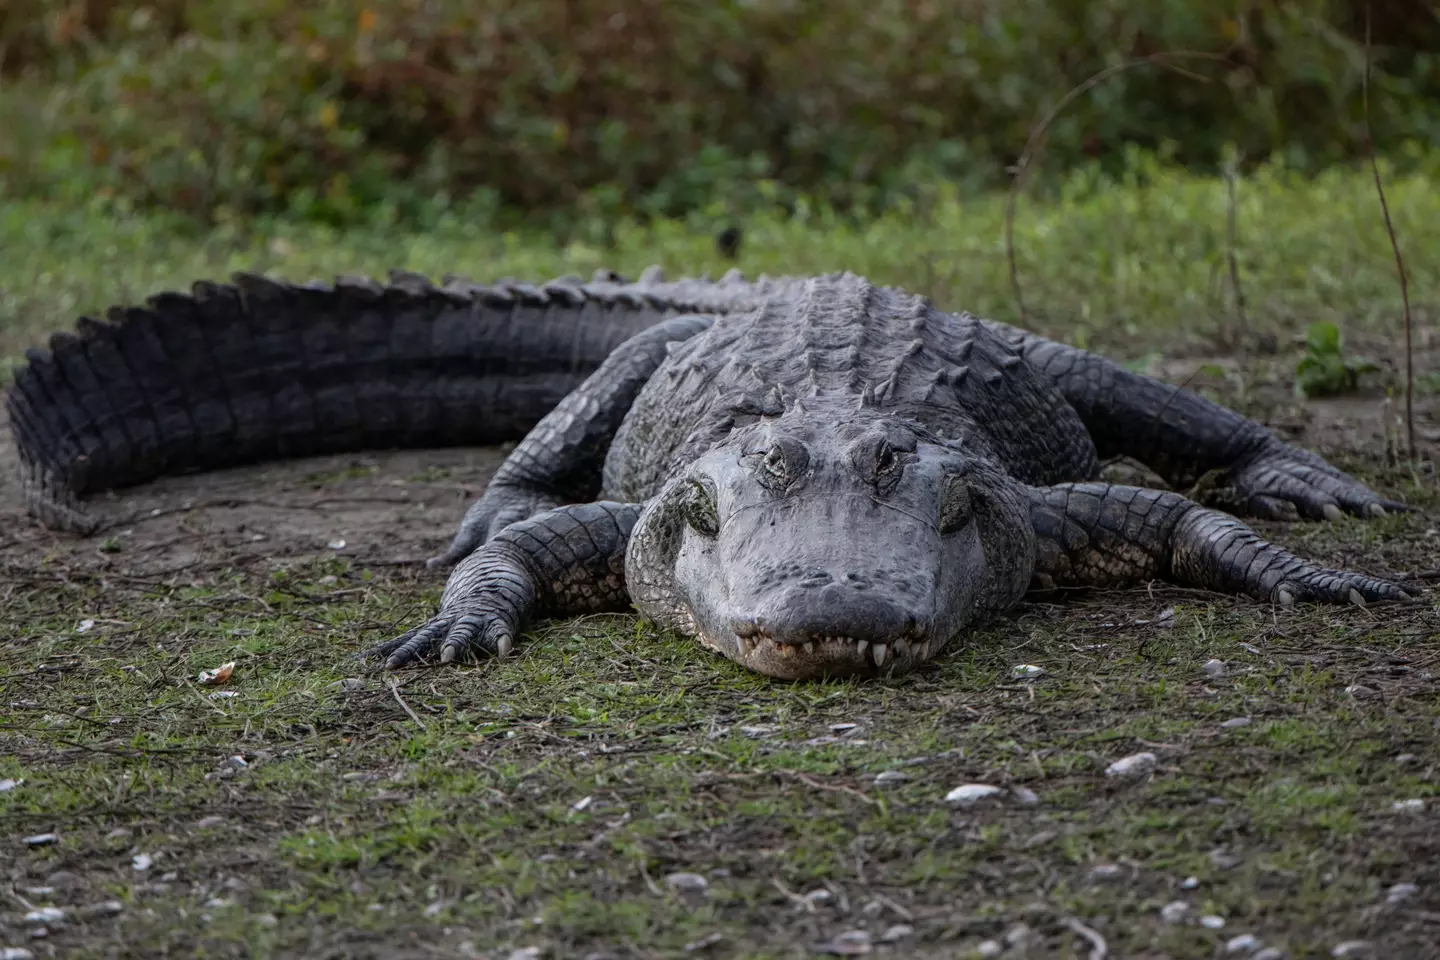 Alligators can reach speeds of 30mph on land.